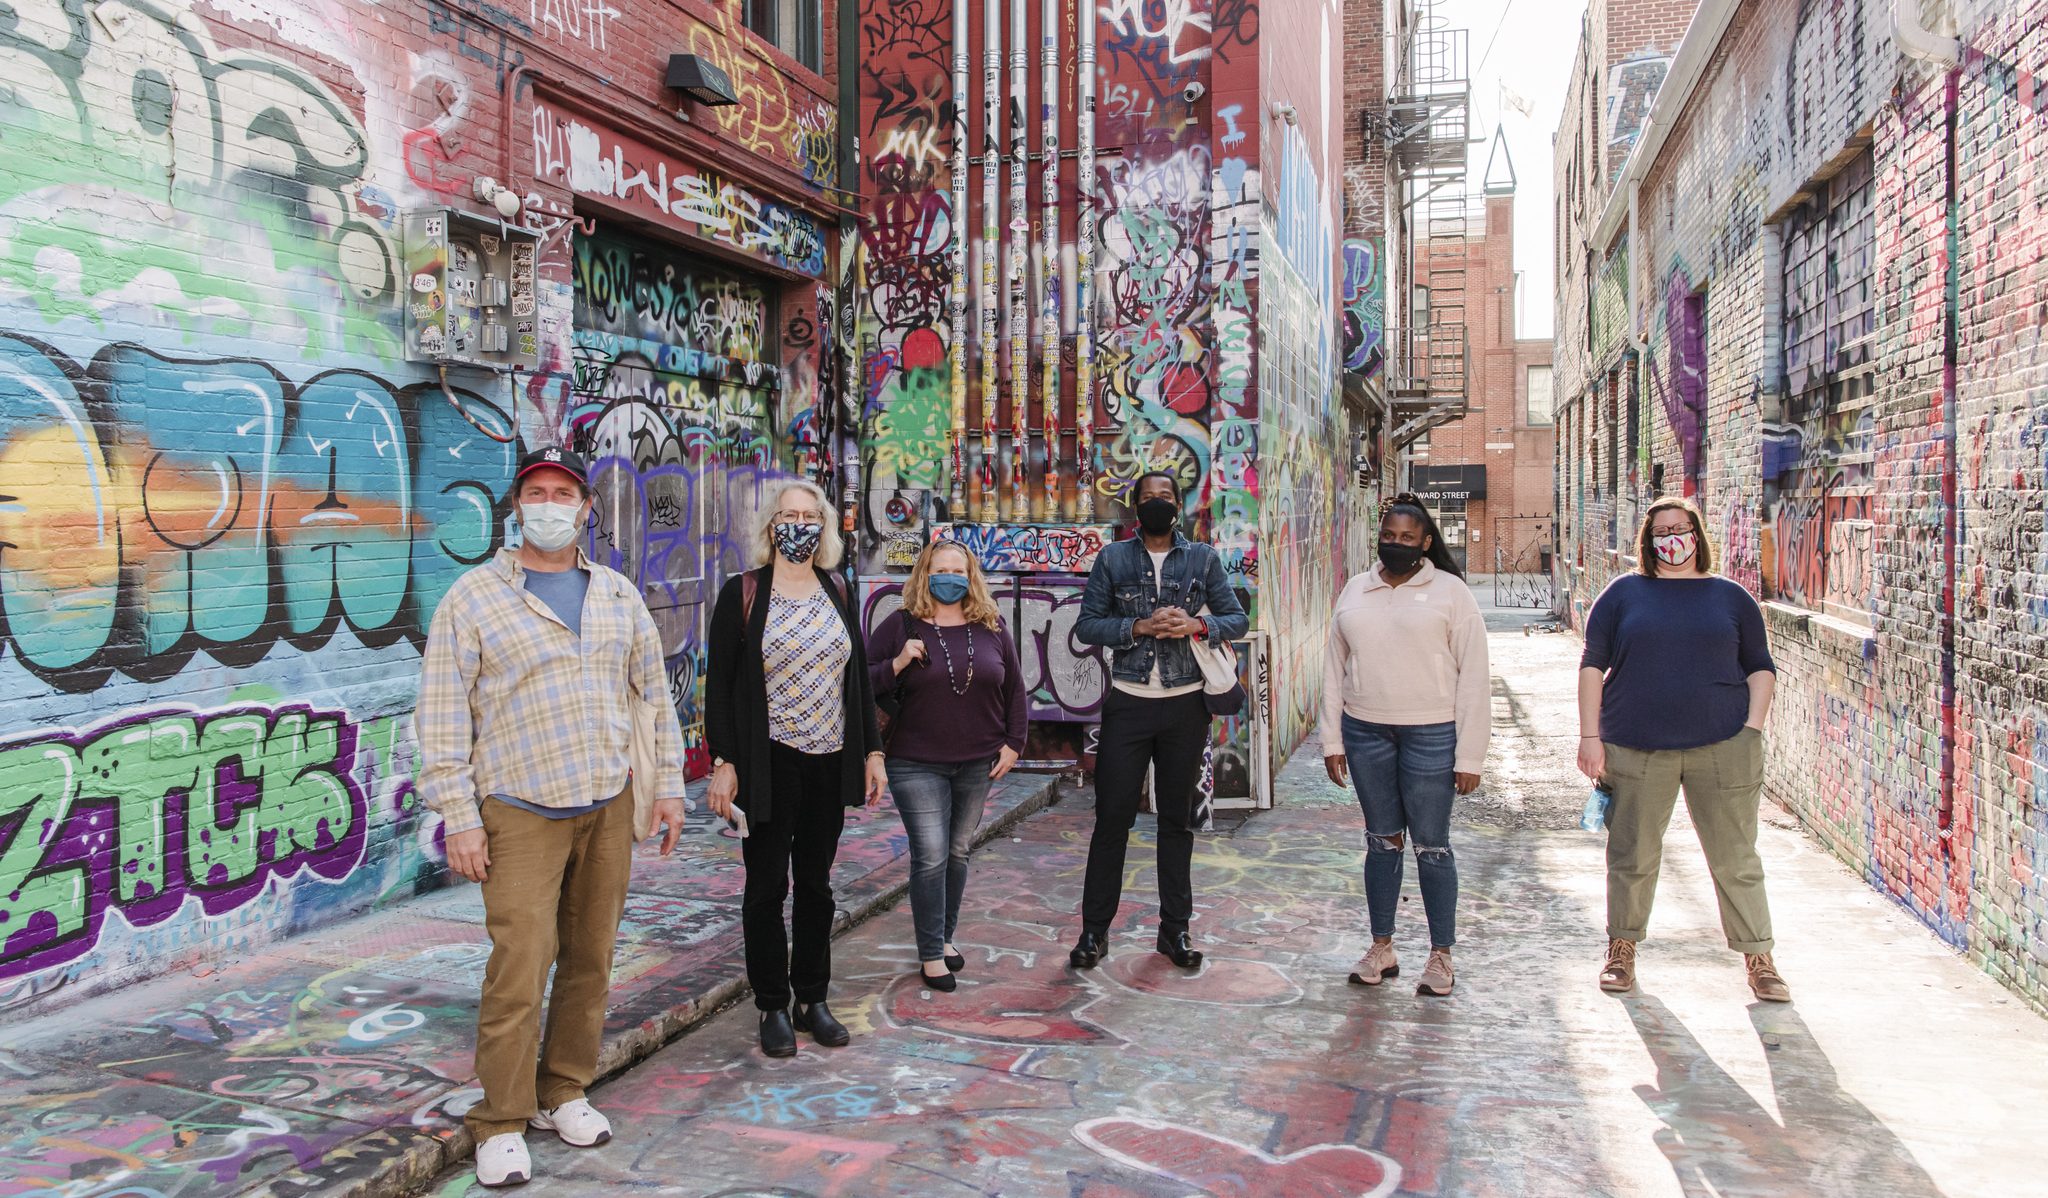 Six people, all wearing masks, standing in a road. The surrounding walls have graffiti on them.